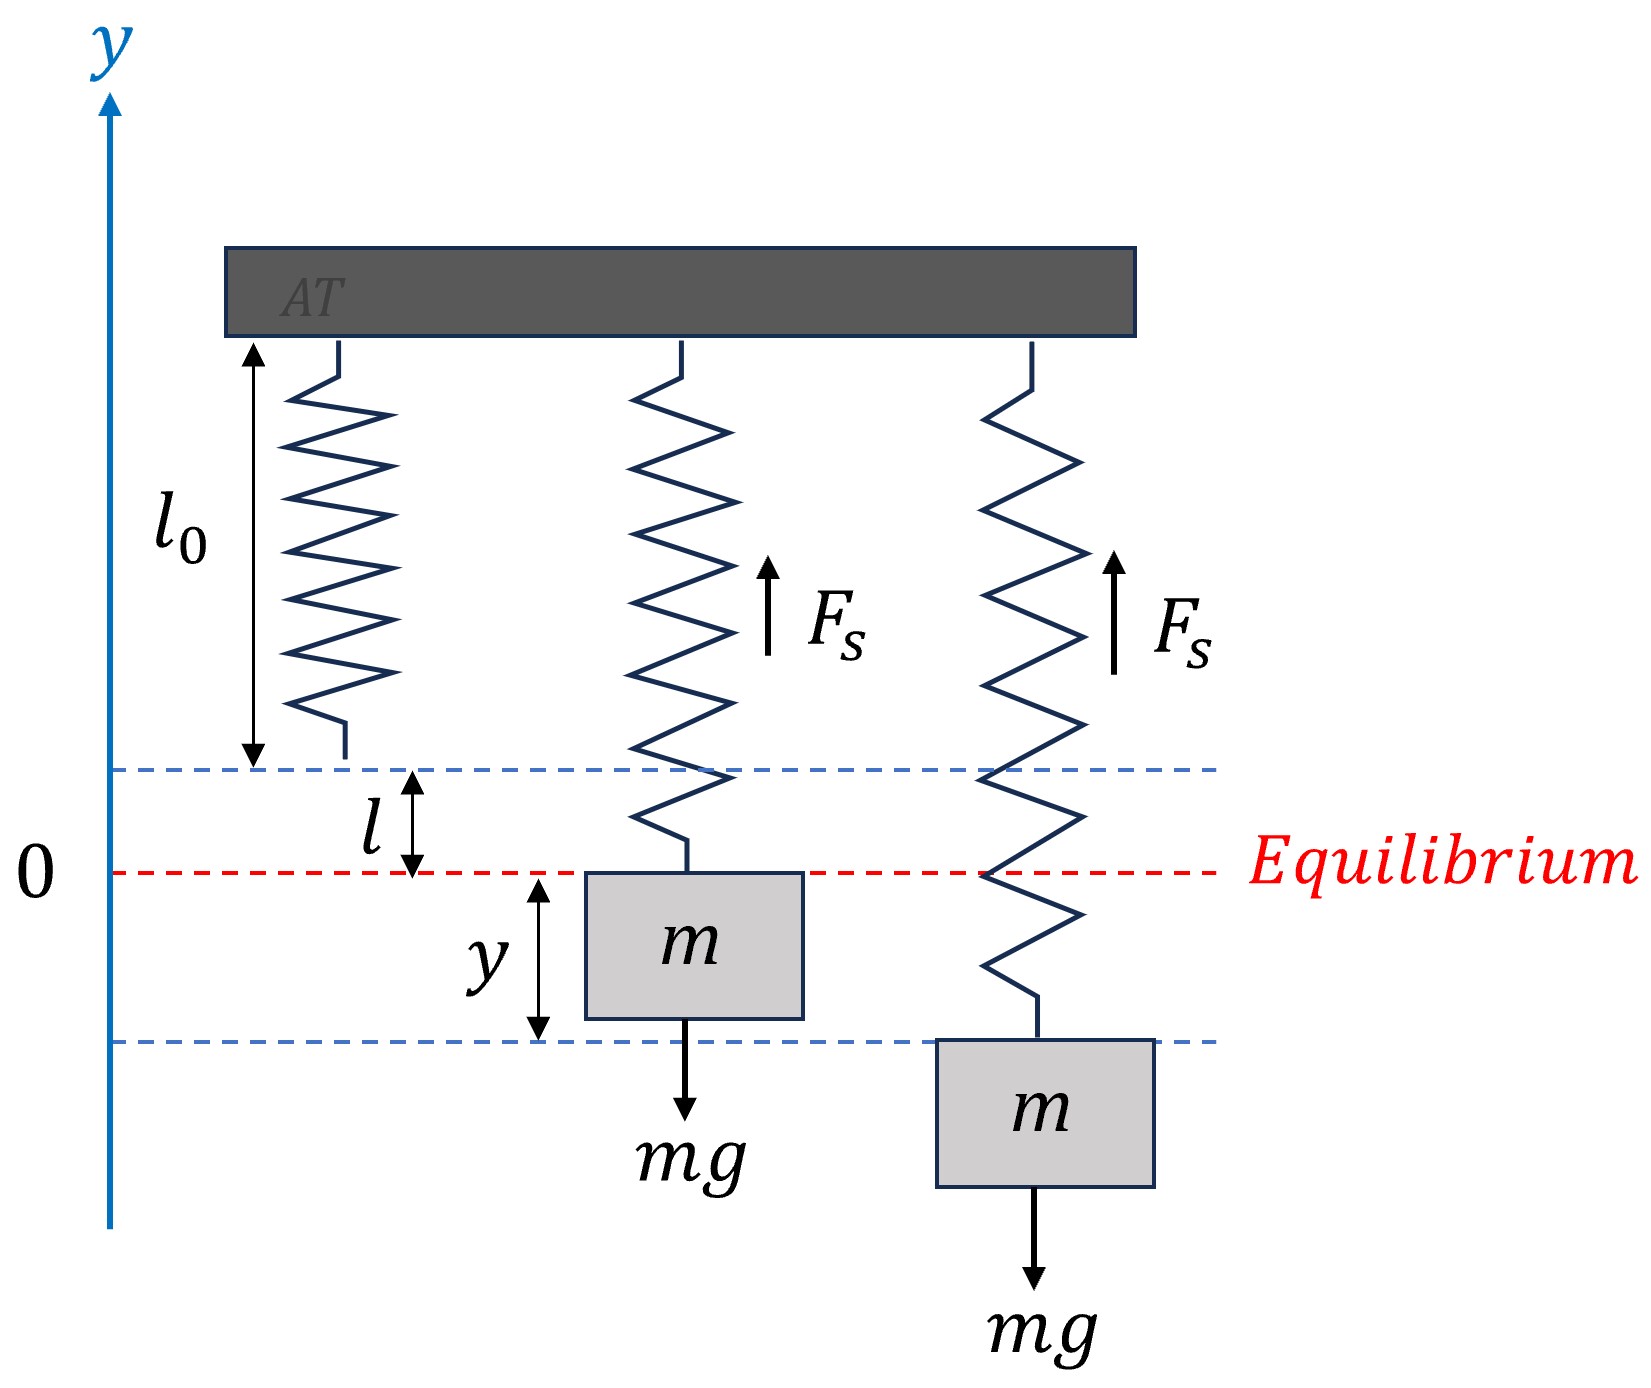 mass-spring system. Spring without mass has a length l0. When mass is attached, it stretches by length l, which is the equilibrium point. The displacement from equilibrium is variable y.